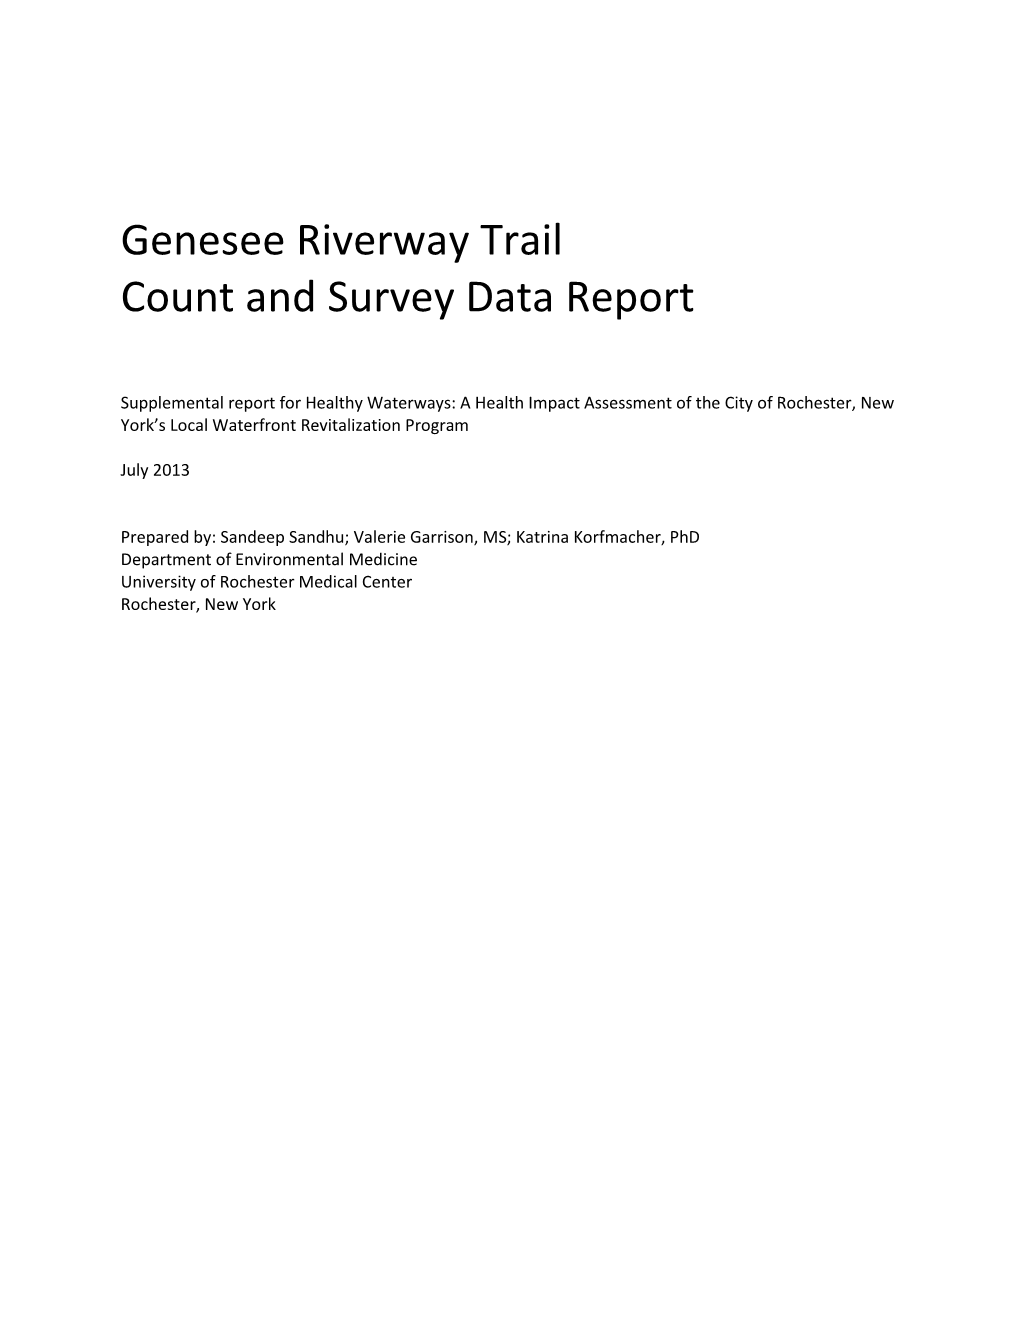 Genesee Riverway Trail Count and Survey Data Report